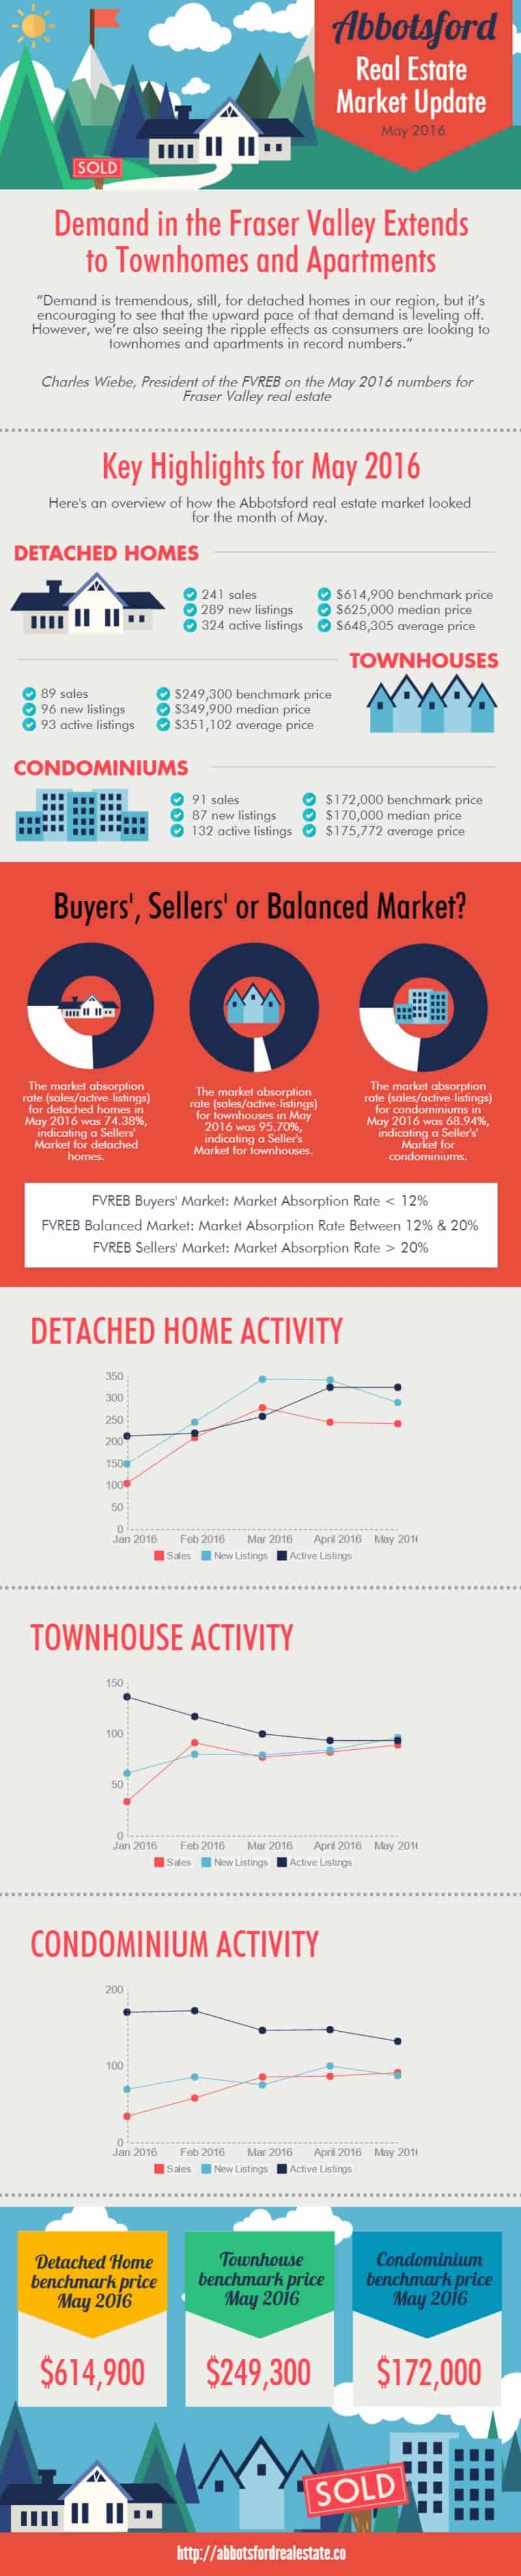 Abbotsford Townhouse Market Update May 2016 Infographic